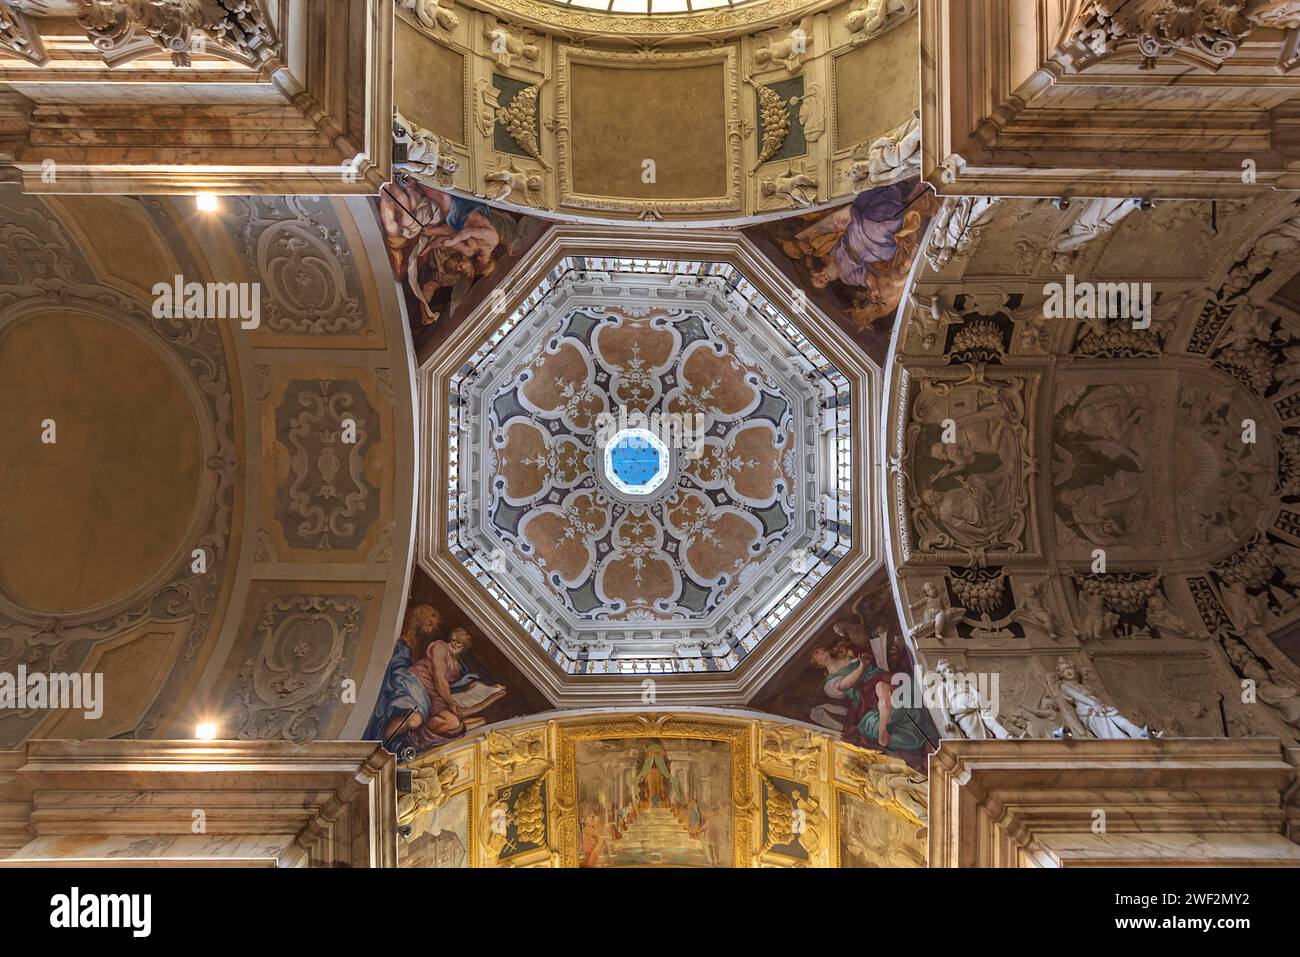 Dome of the church of San Pietro ion Banchi, consecrated in 1585, Piazza Banchi Genoa, Italy Stock Photo